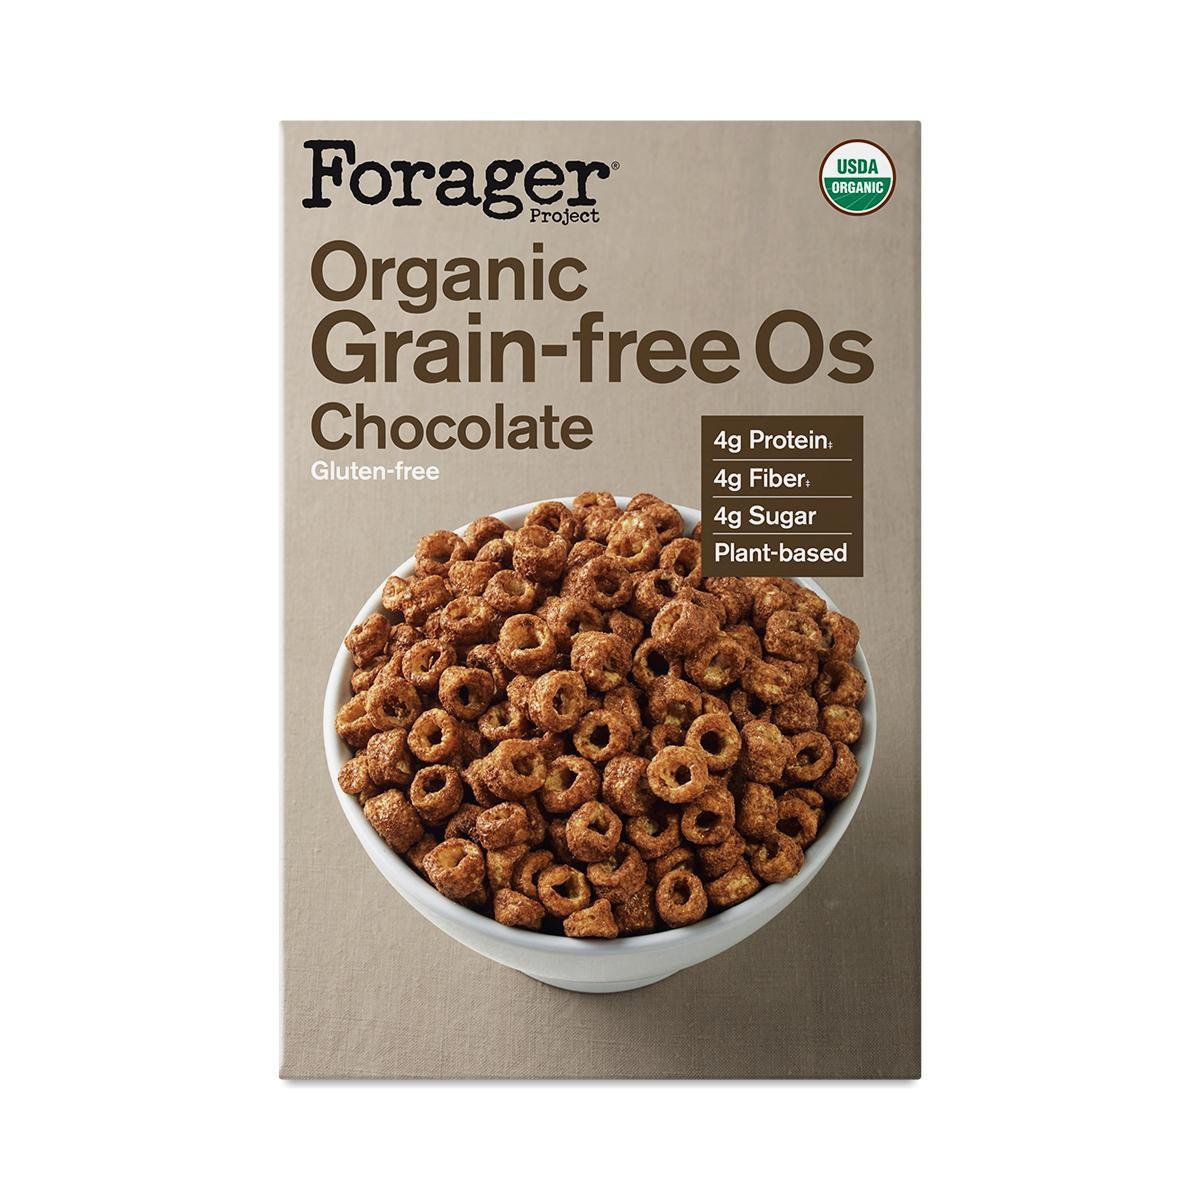 Forager Project Organic Grain-Free Os  Chocolate -  8 Oz